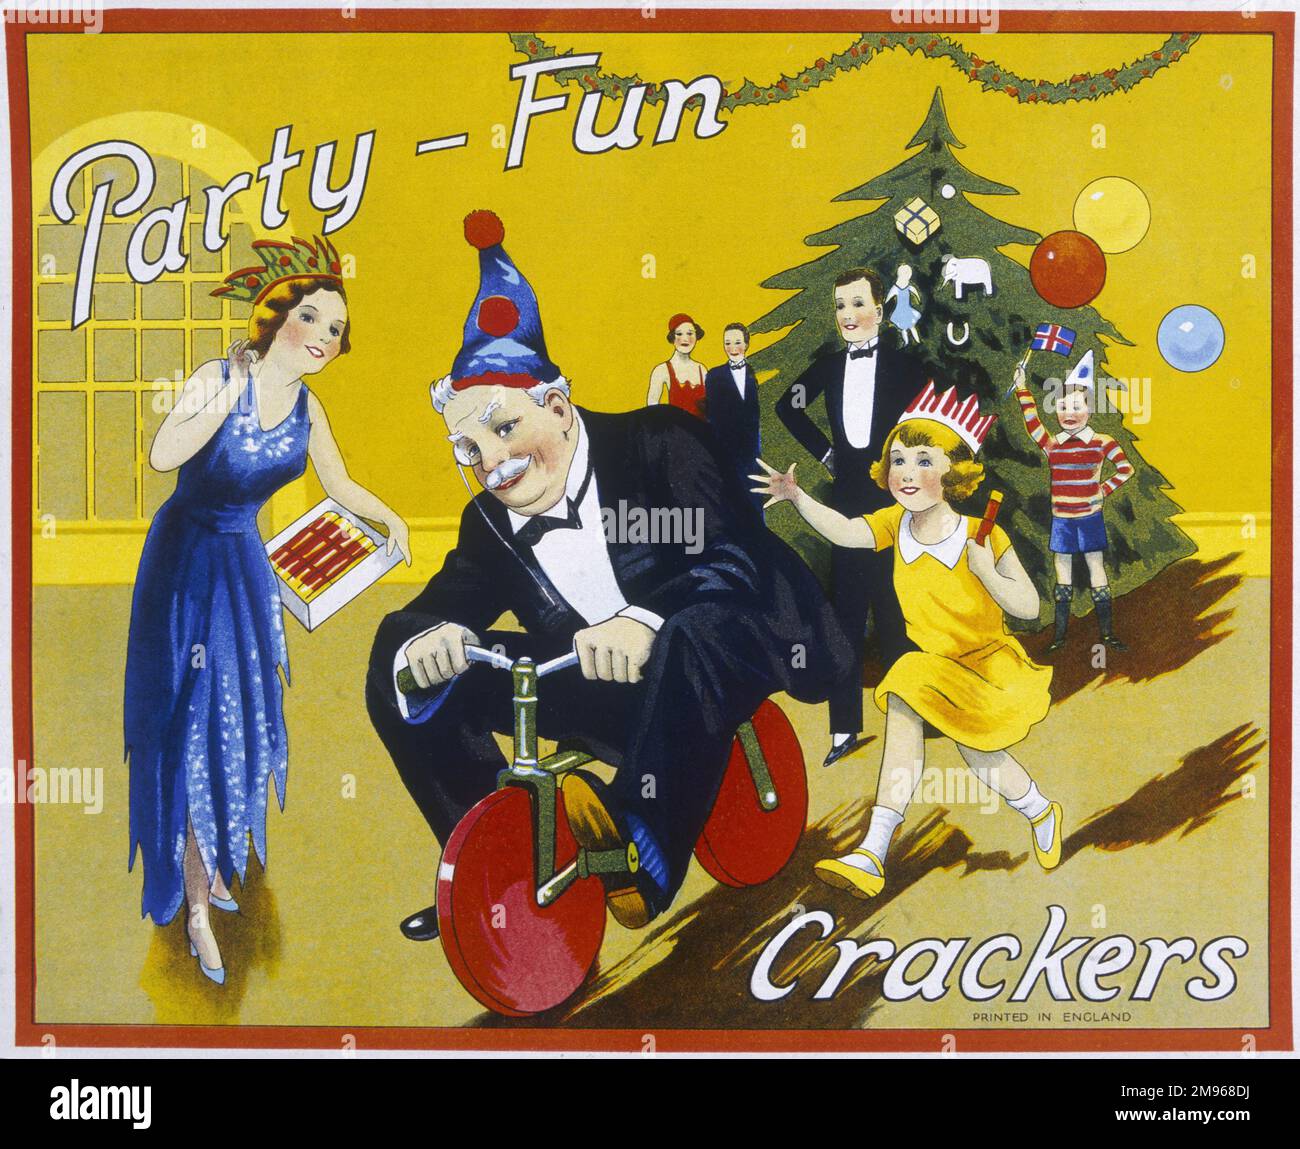 Label from a box of Party Fun Christmas crackers showing a group of excitable children pchasing after an old uncle on a little bicycle. Stock Photo